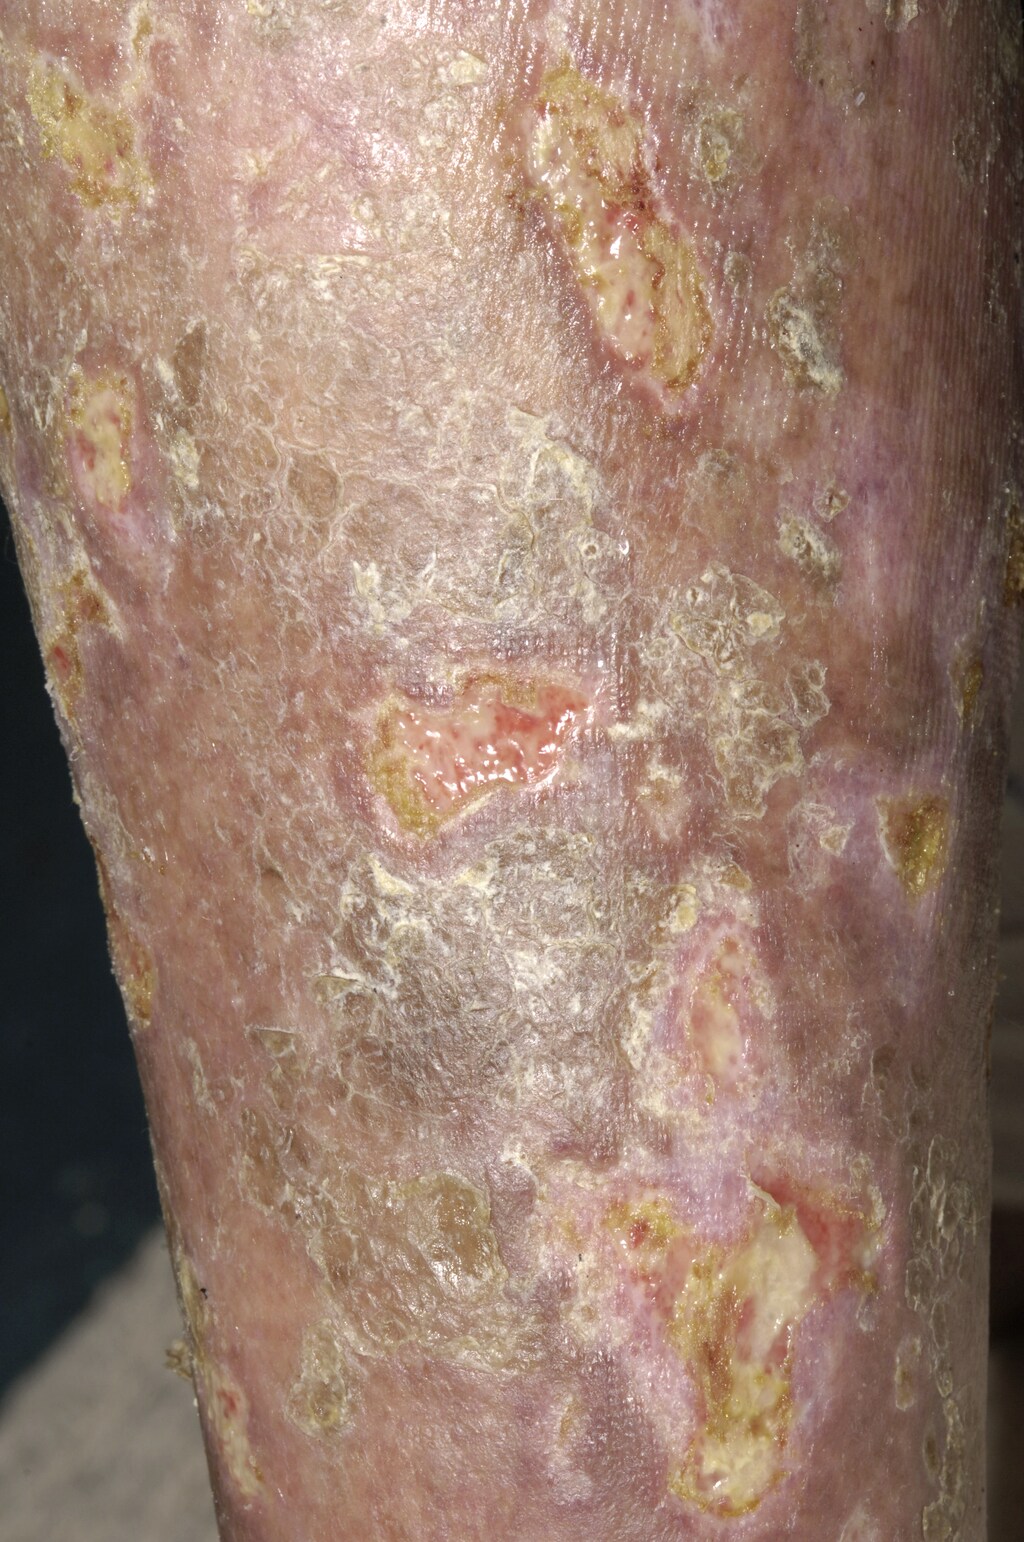 Mycosis Fungoides with Ulceration